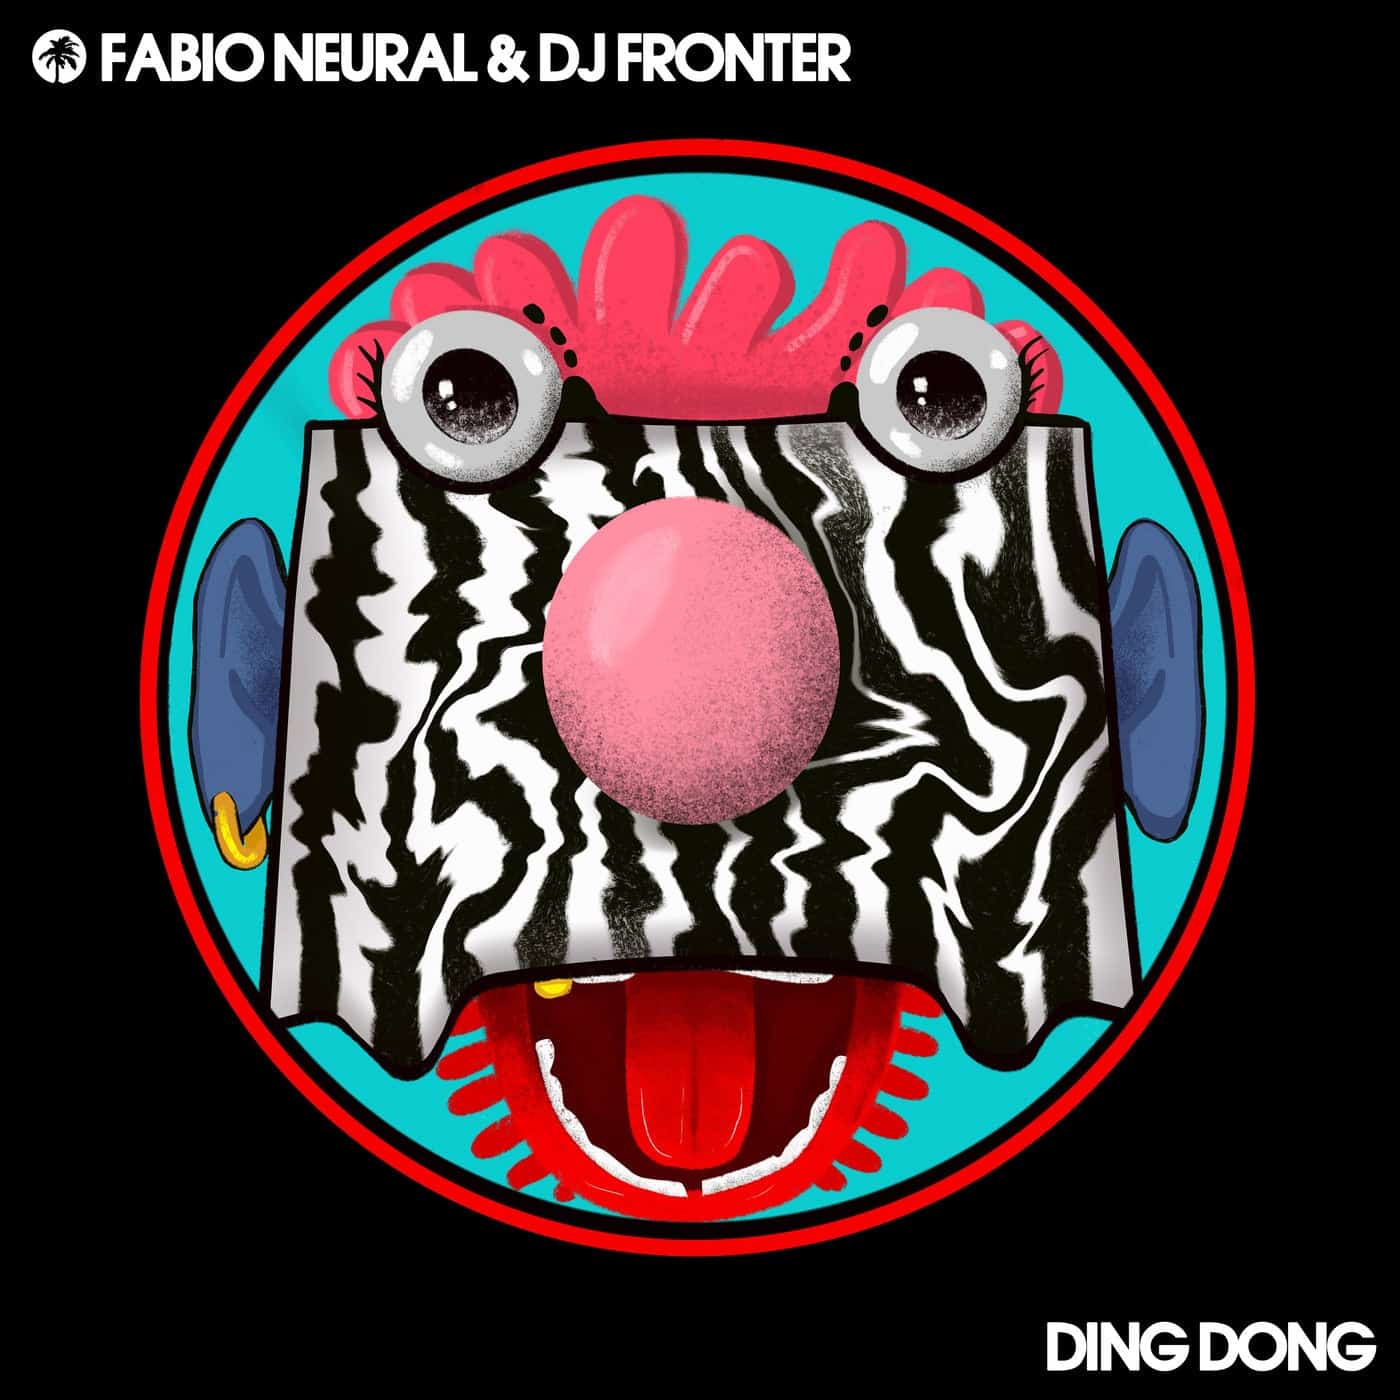 image cover: Fabio Neural, DJ Fronter - Ding Dong / HOTC190